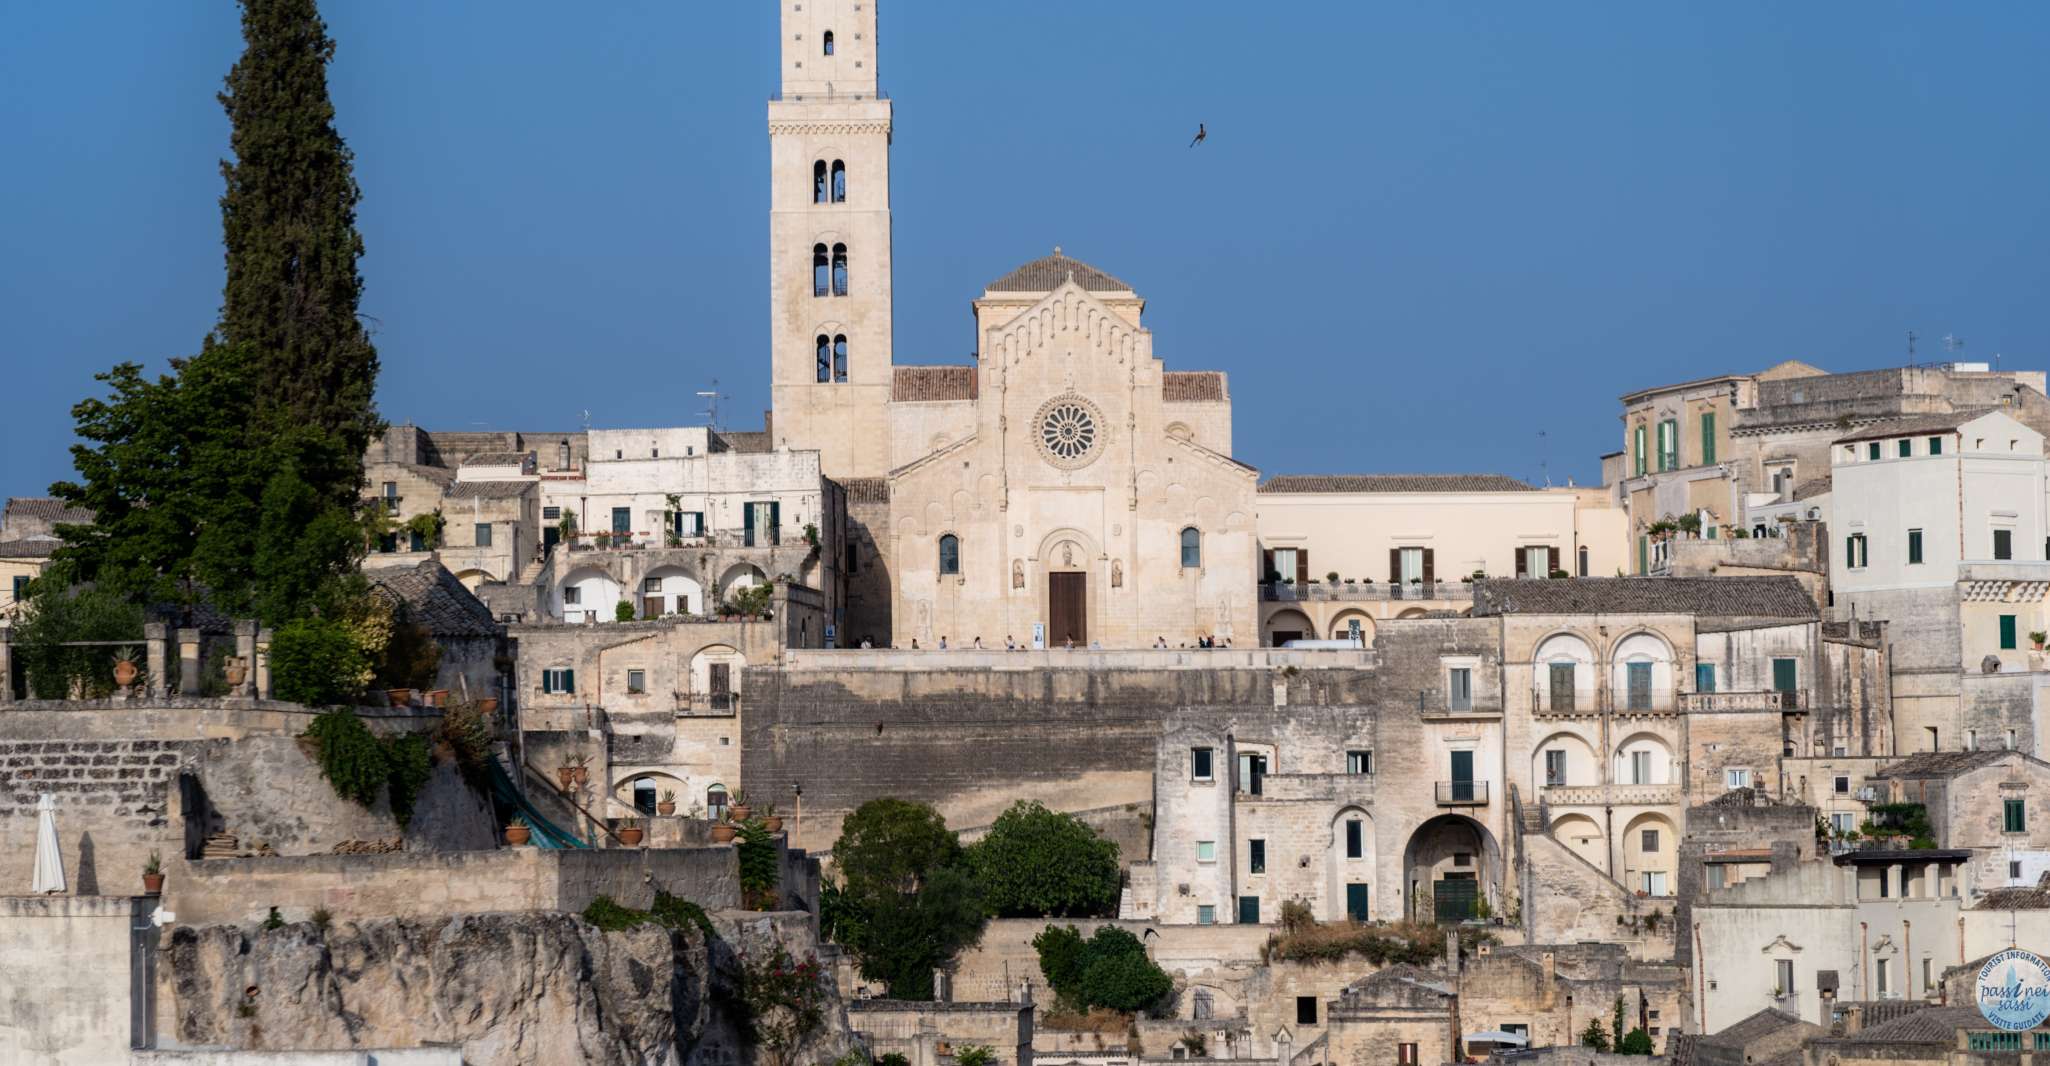 Matera, Sassi Tour with Entry to Rock Houses and Churches - Housity